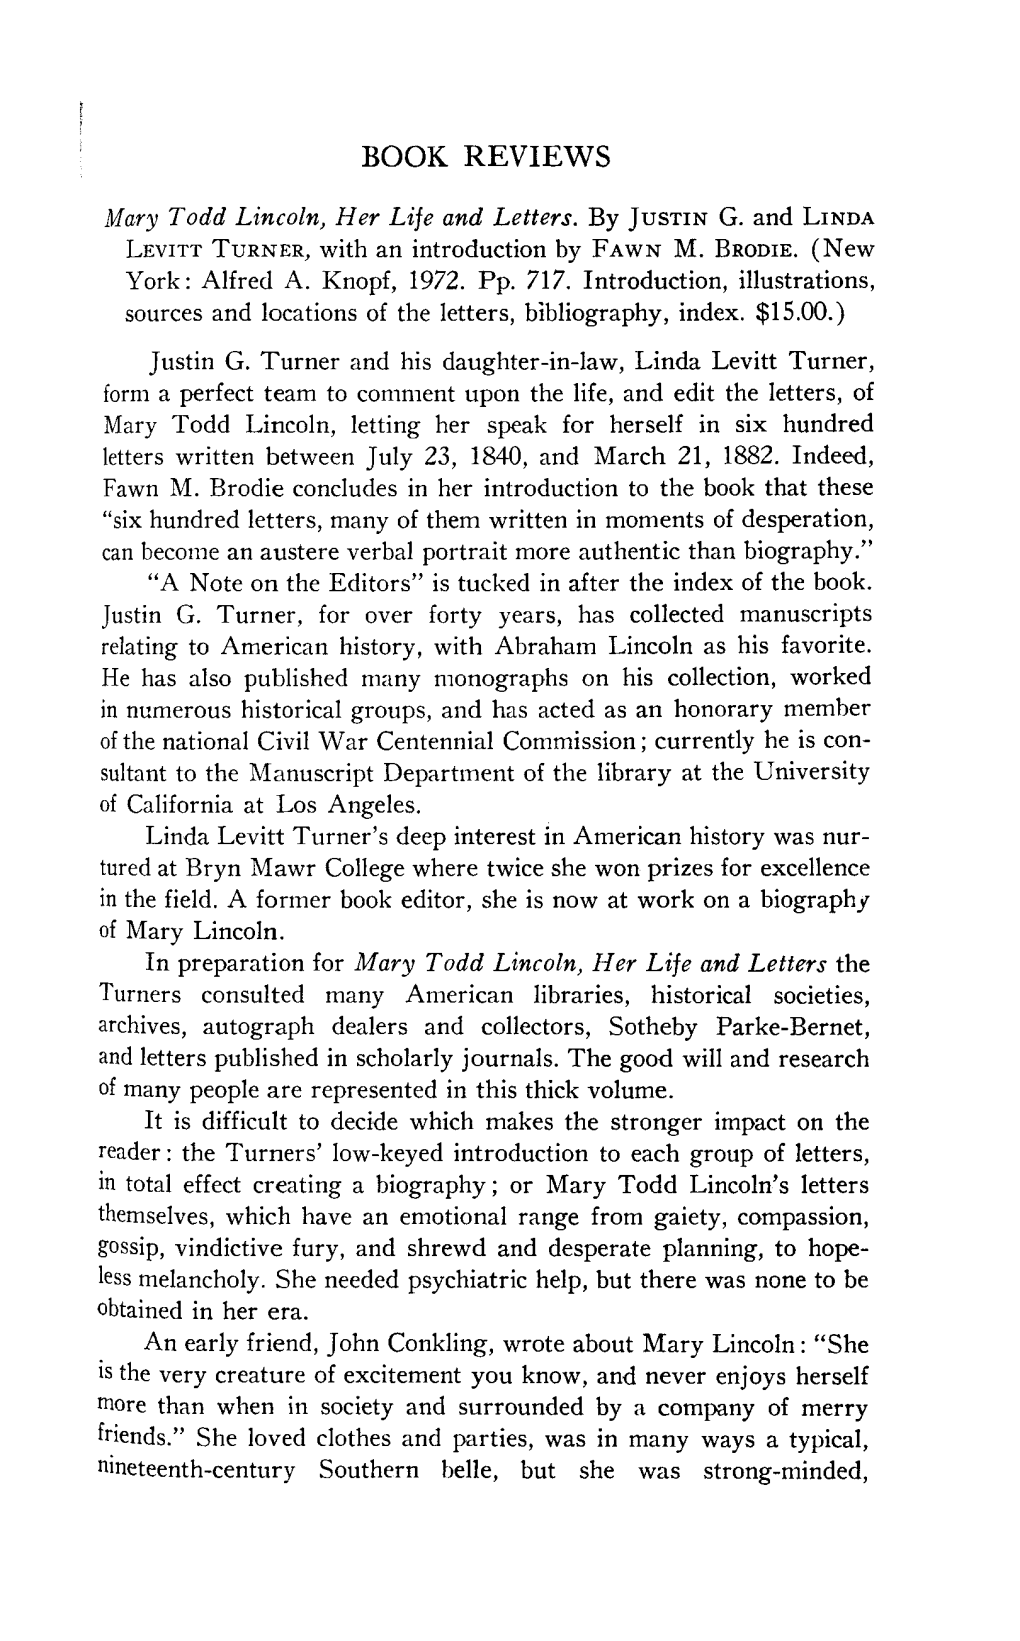 BOOK REVIEWS Mary Todd Lincoln, Her Lifeand Letters